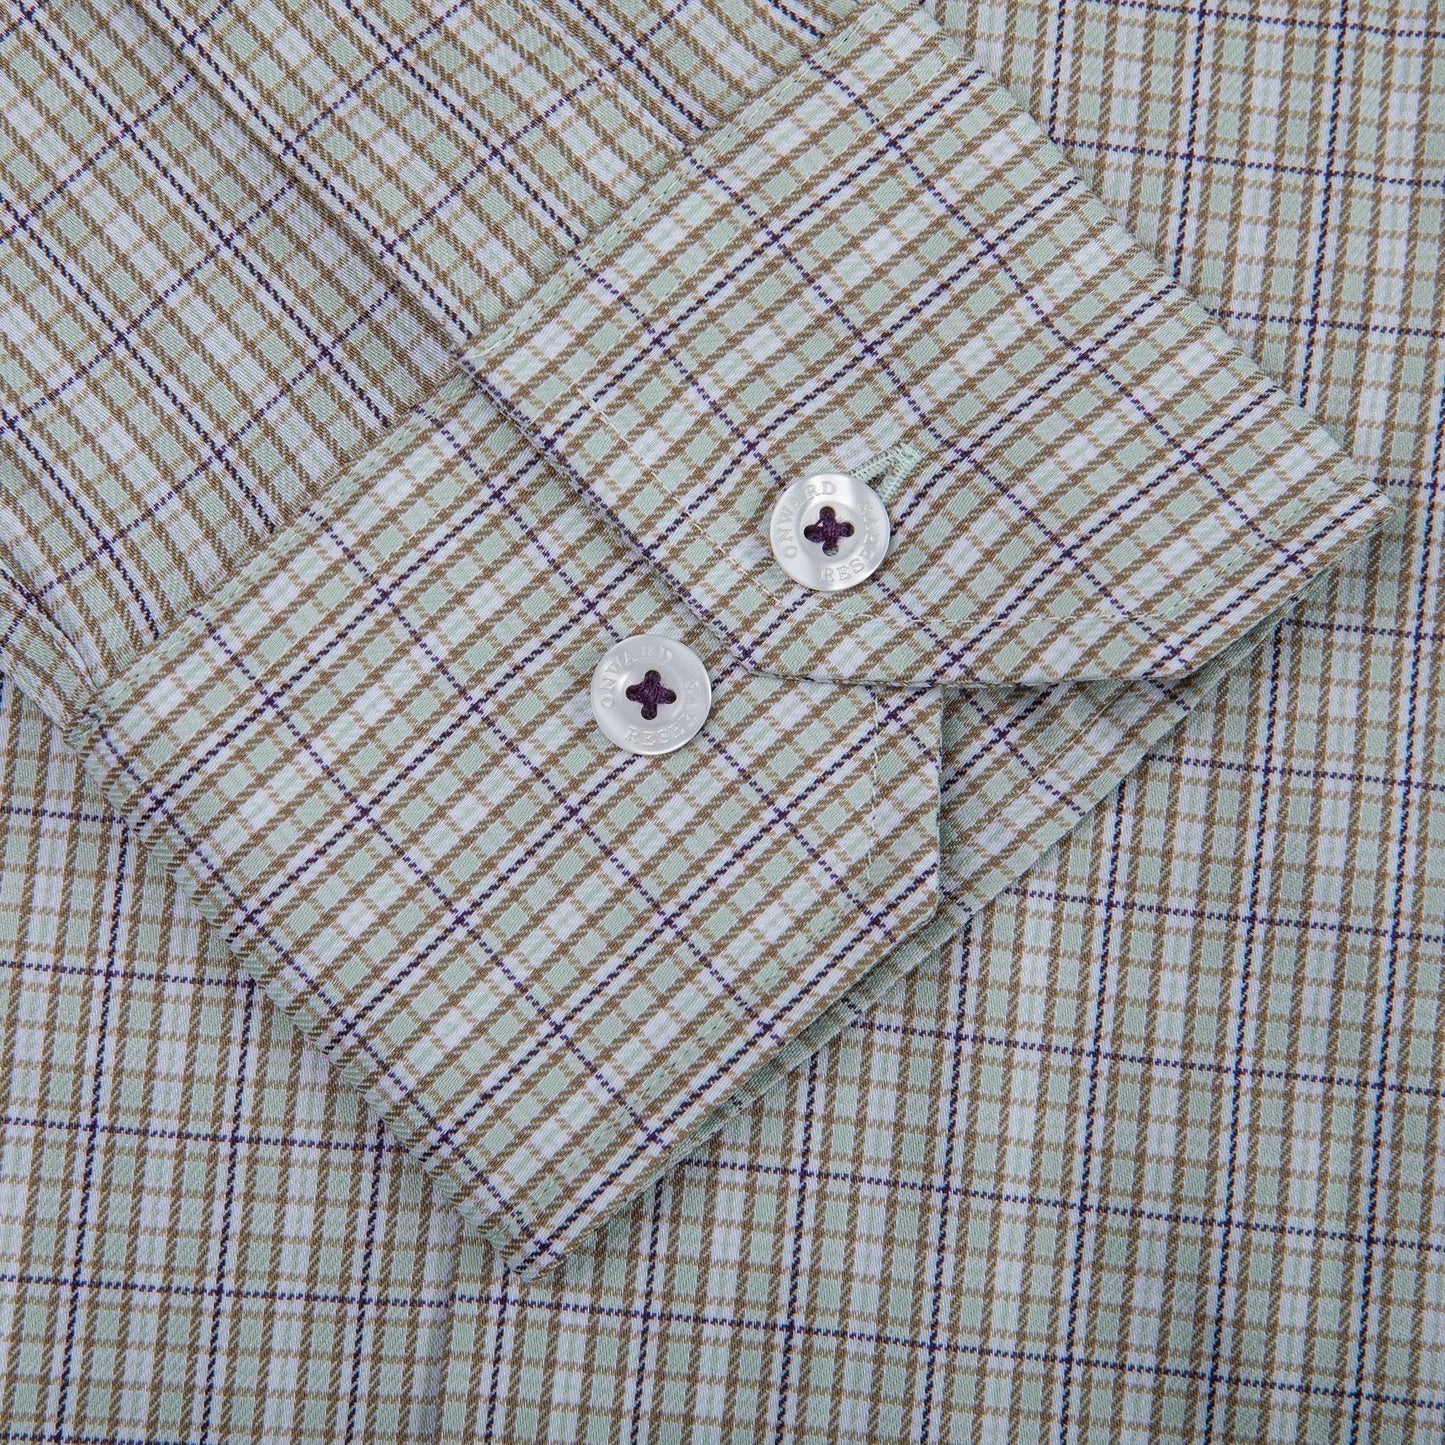 Paxton Tailored Fit Performance Twill Button Down - Onward Reserve